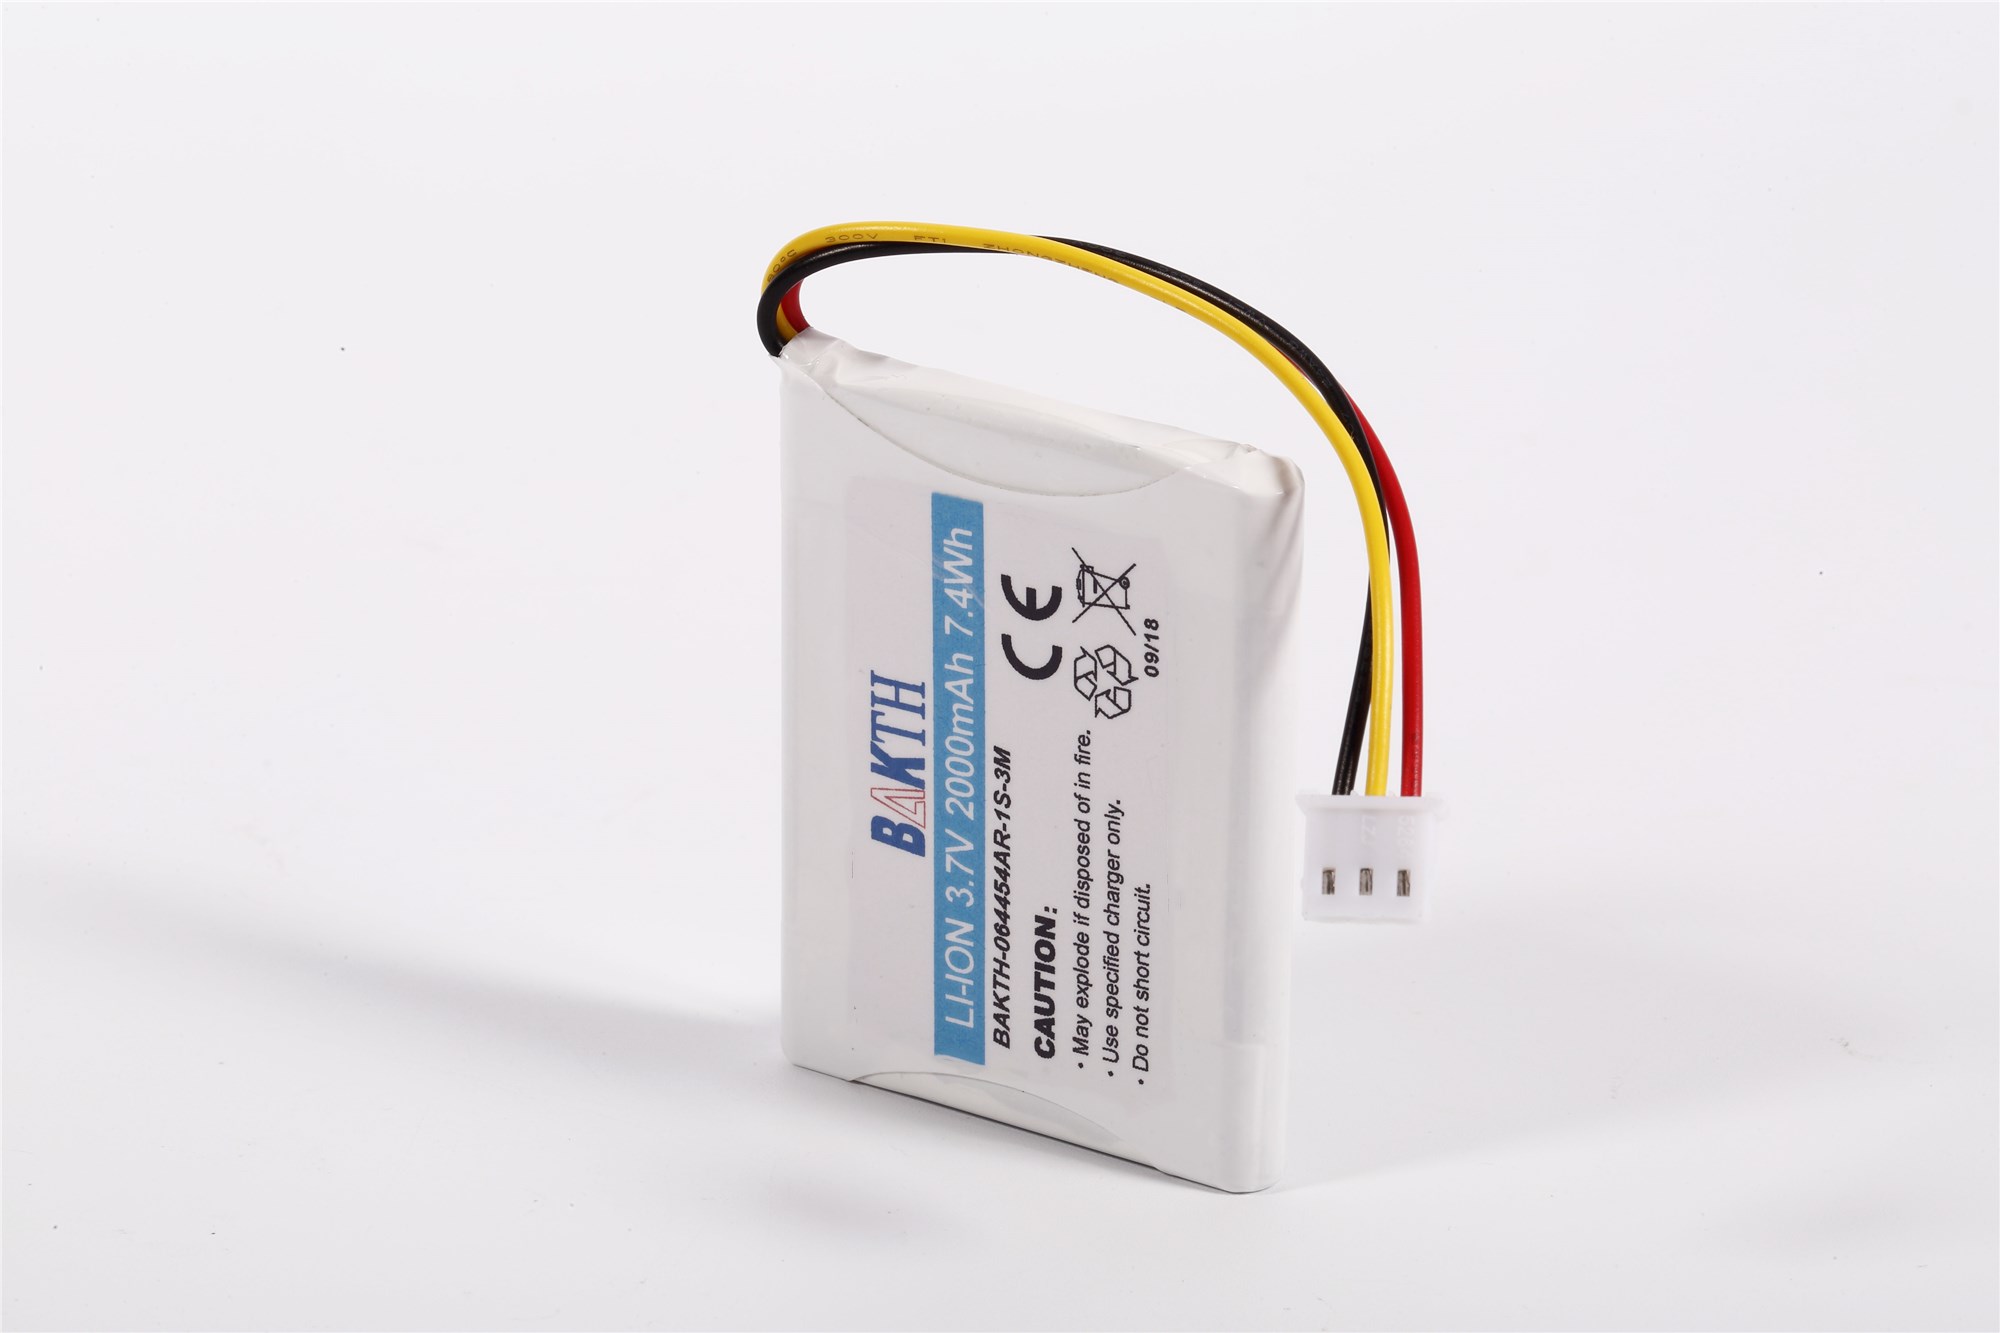 BAKTH-064454-1S-3M Lithium ion Battery Pack 3.7V 2000mAh Rechargeable Battery Pack